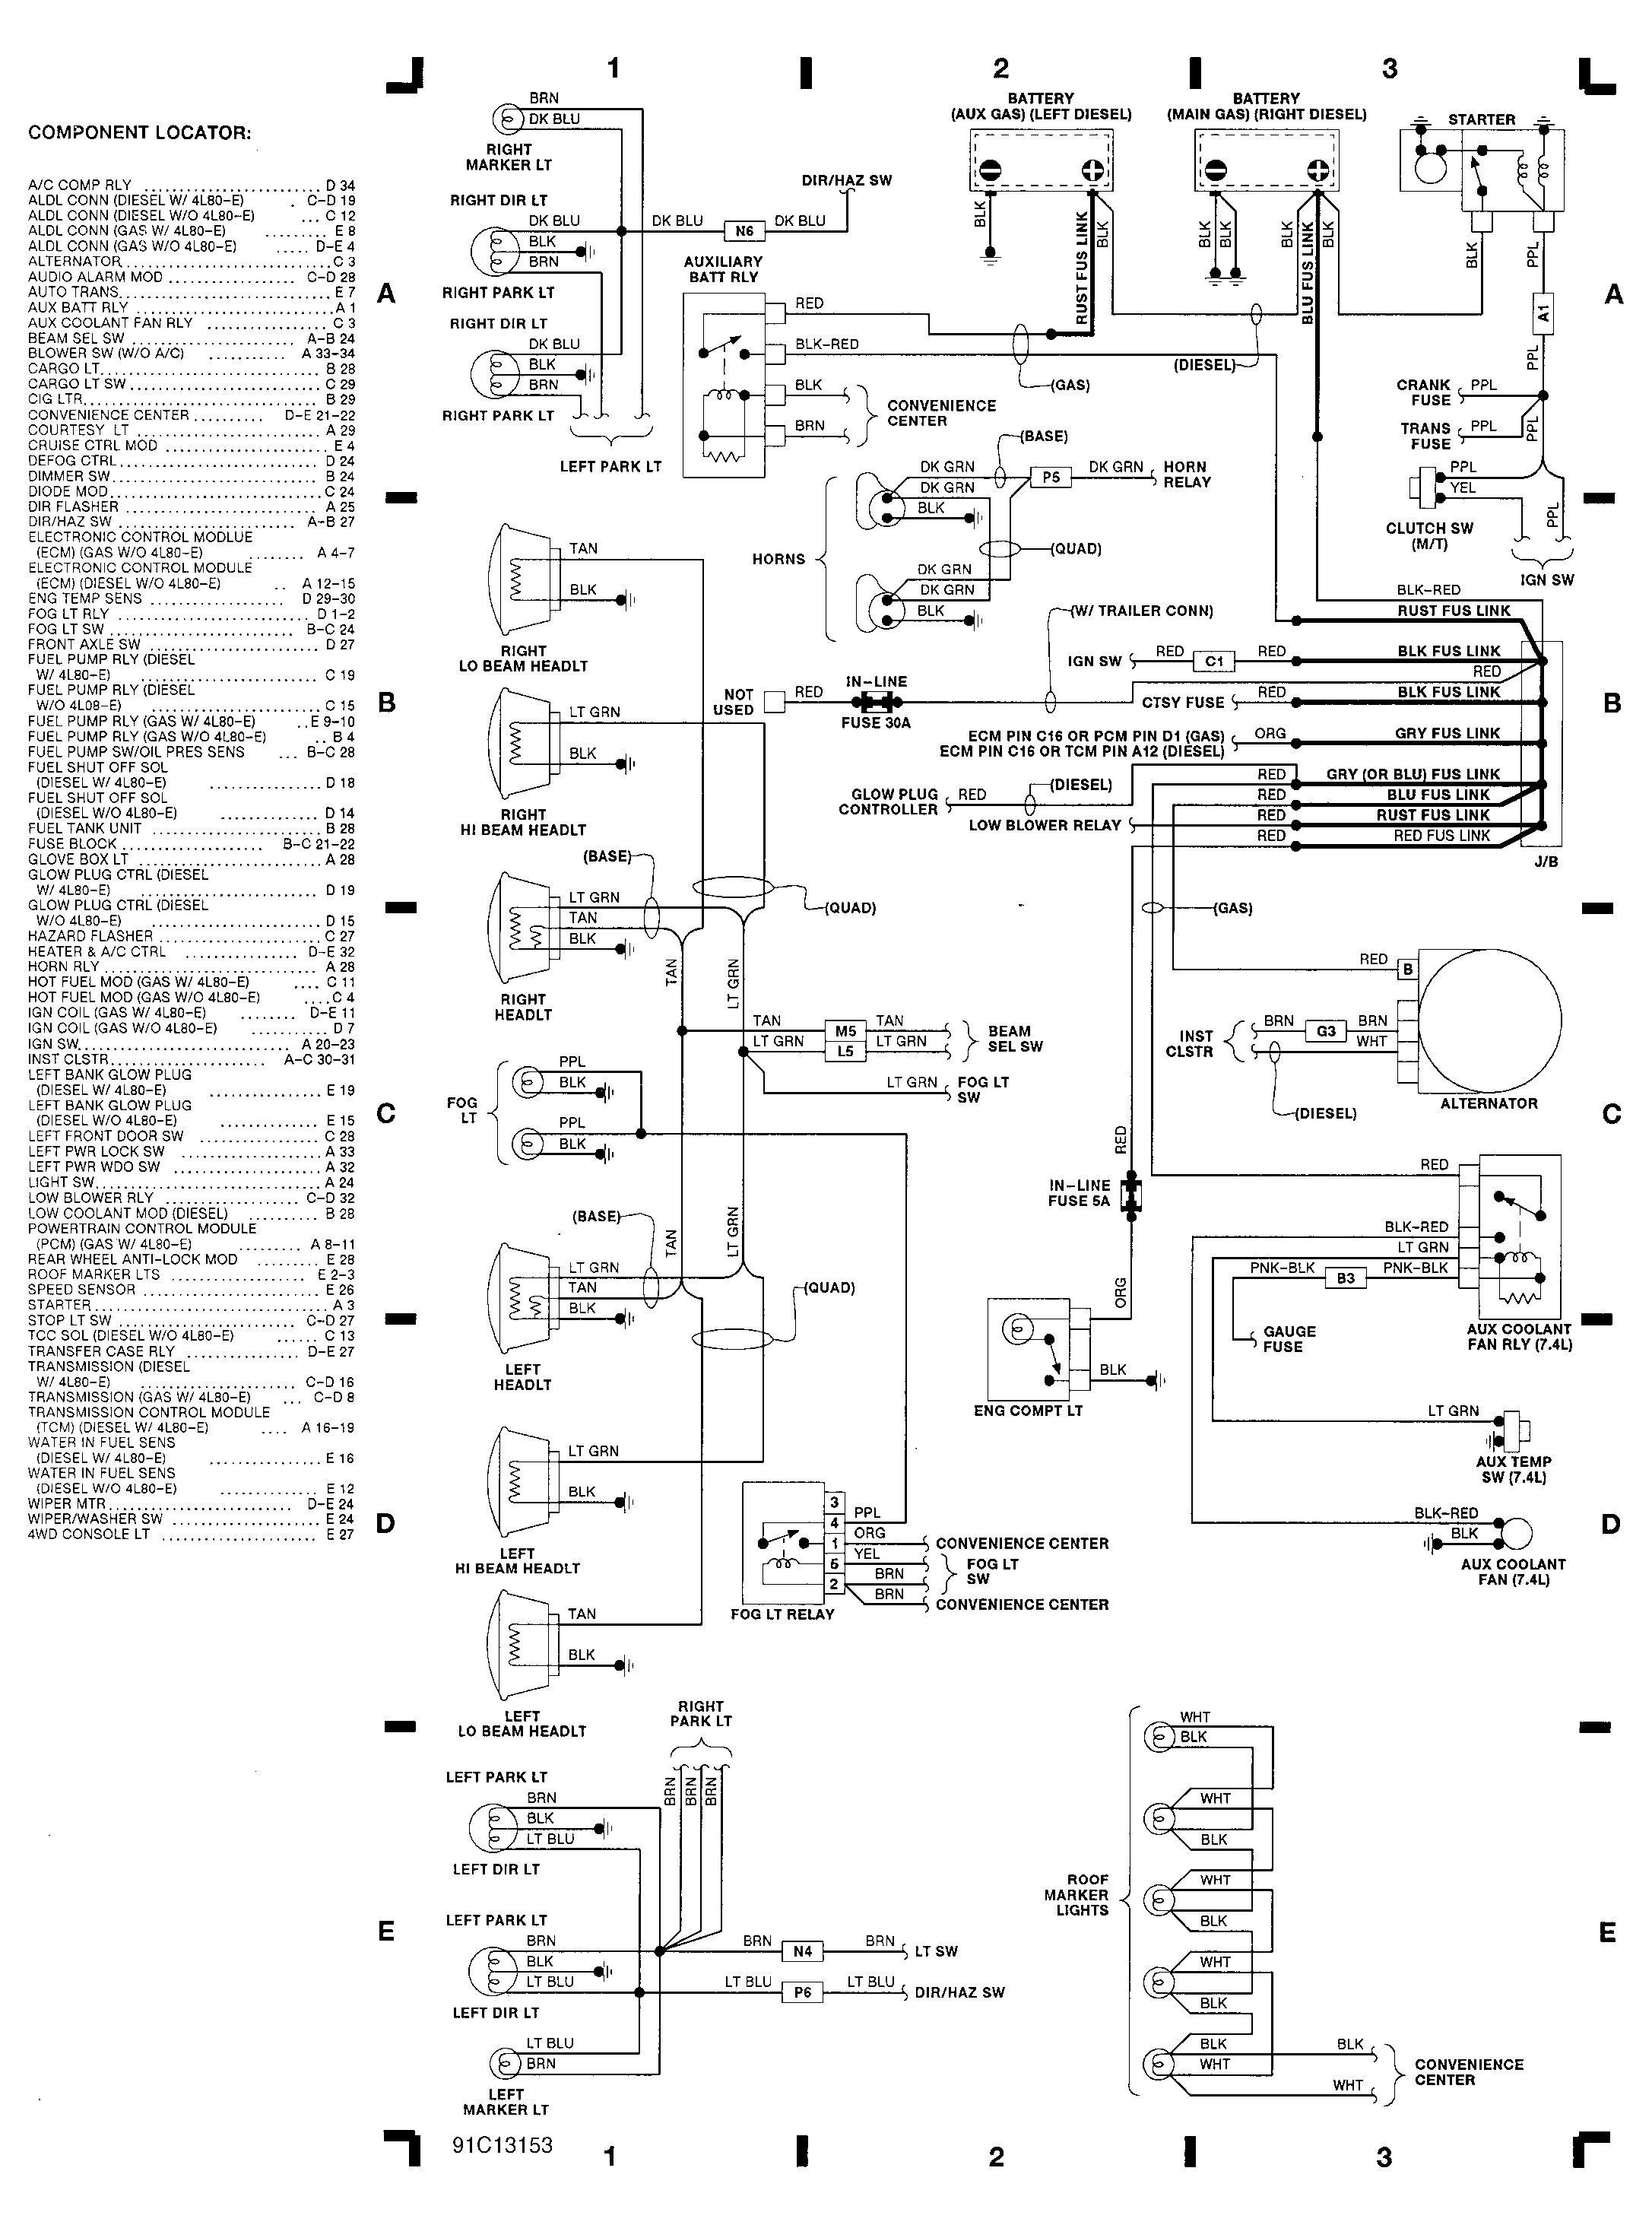 Wiring Diagram for 2001 Chevy S10 4.3 Engine 7 4 Chevy Engine Diagram Full Hd Version Engine Diagram Of Wiring Diagram for 2001 Chevy S10 4.3 Engine